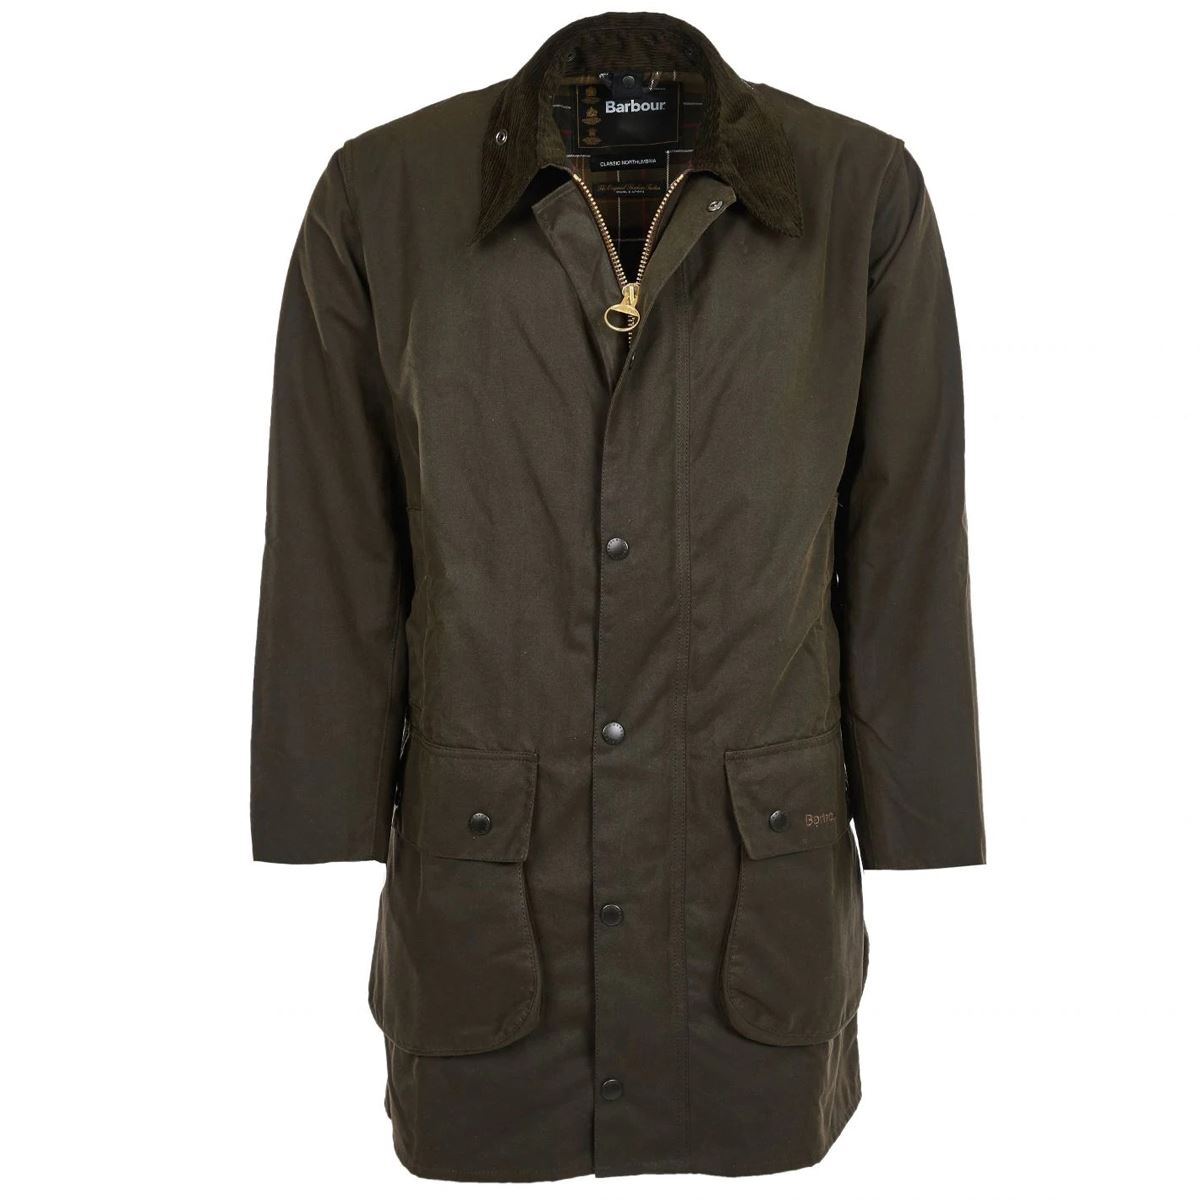 Where can I get guidance on cleaning & re-waxing my Barbour Northumbria jacket?